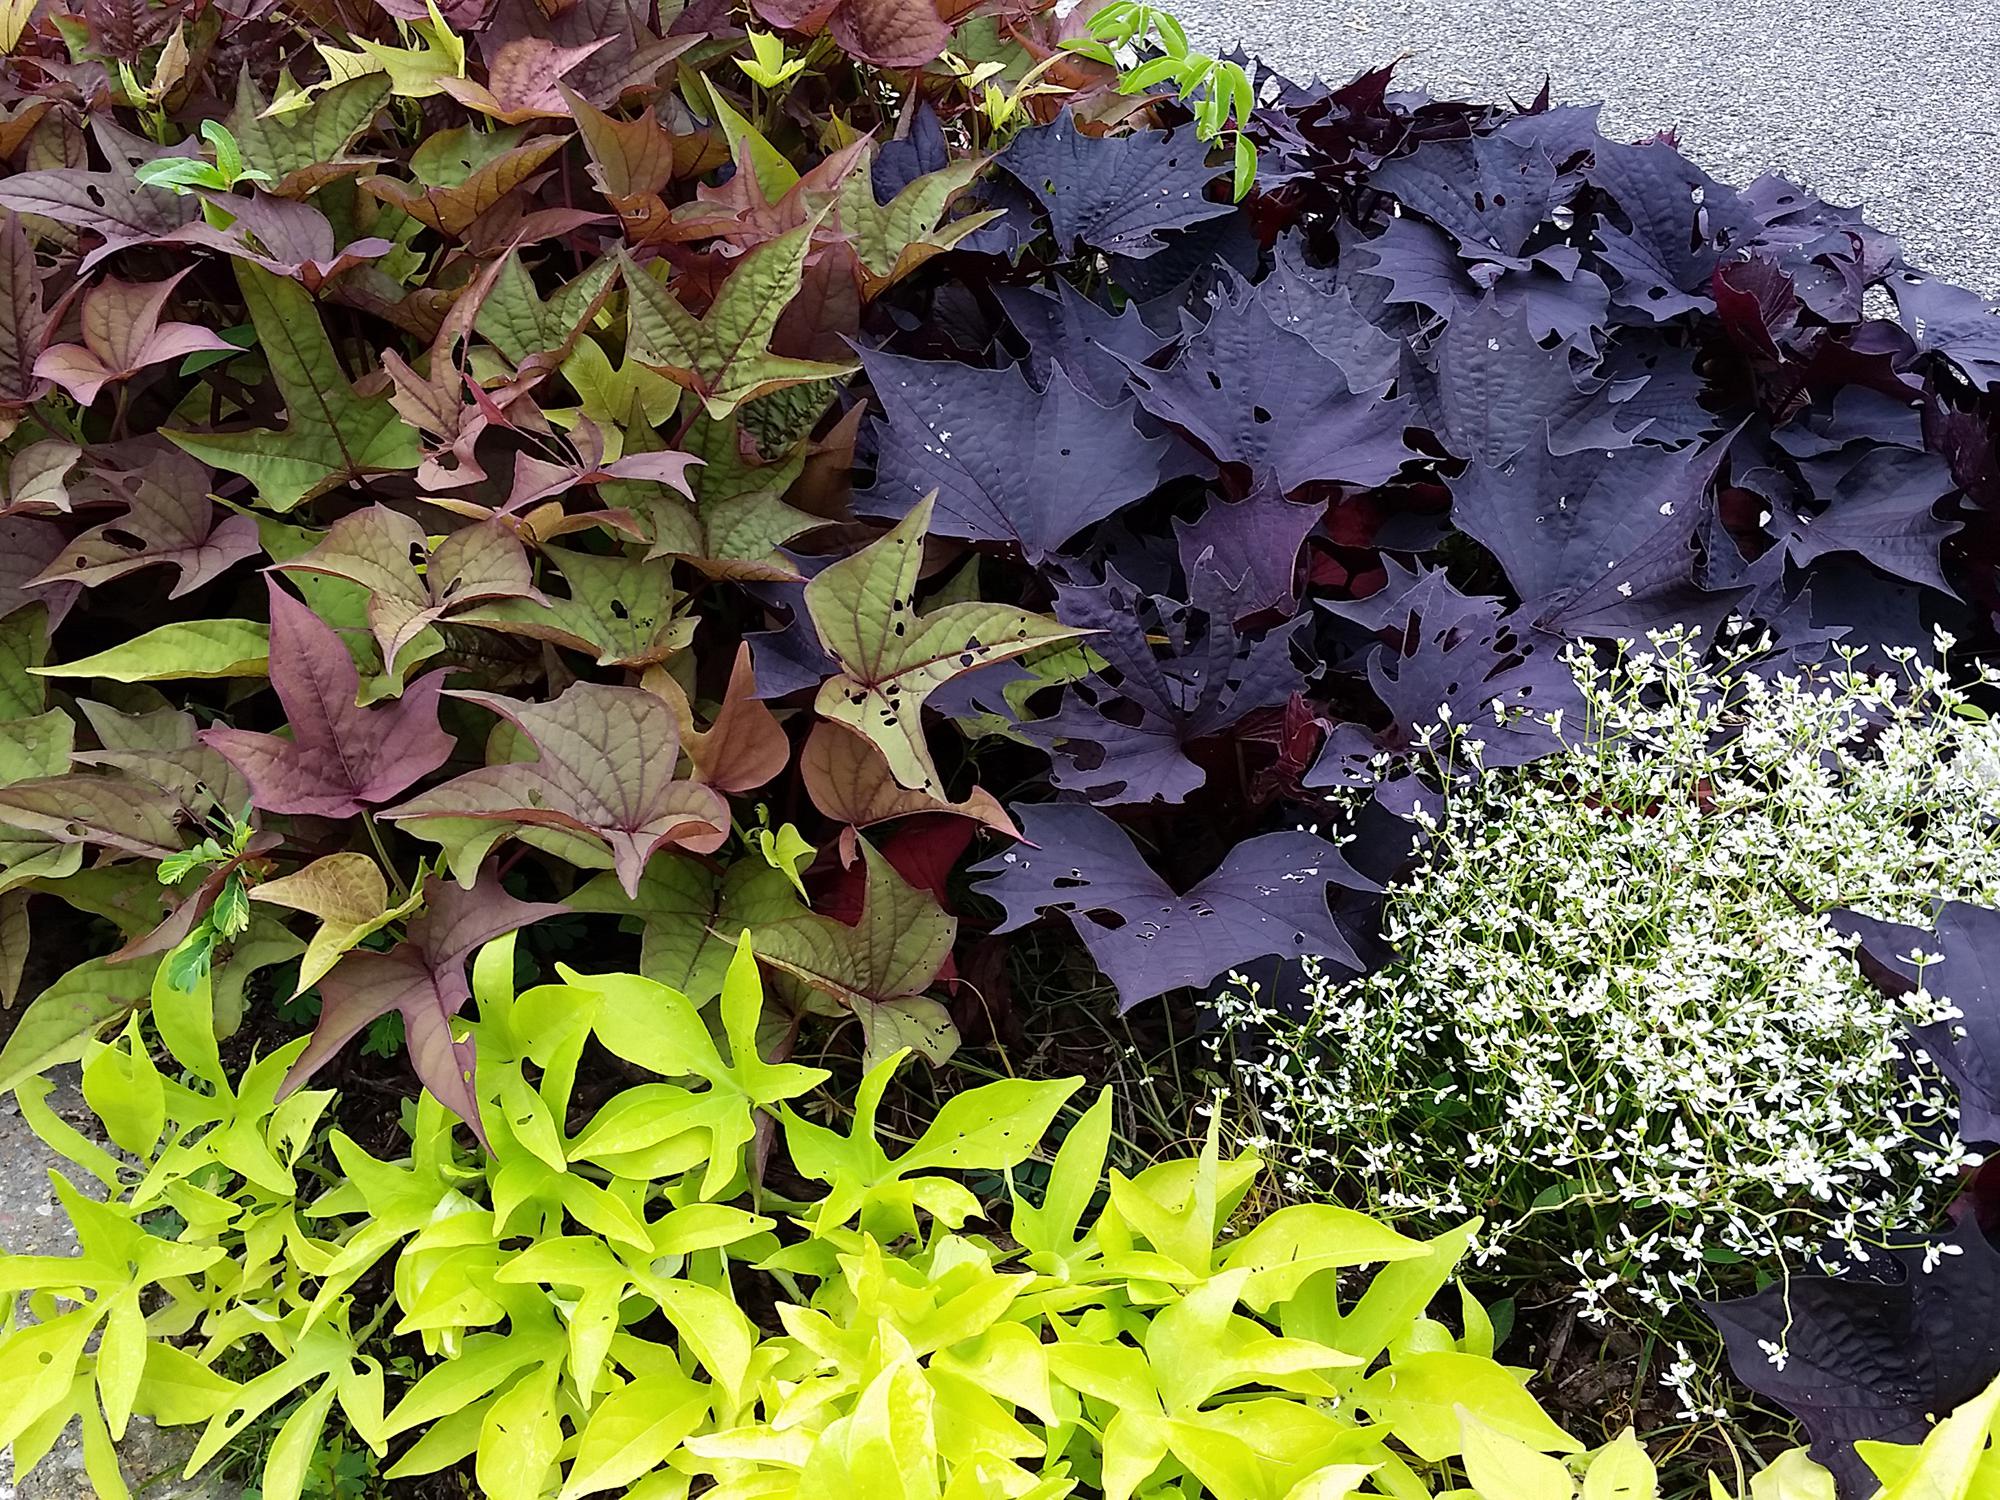 The deep purple of a Sweet Caroline Bewitched sweet potato vine grows alongside the Bright Ideas Rusty Red and Bright Ideas Lime varieties, with Diamond Frost Euphorbia providing a pop of tiny white flowers. (Photo by MSU Extension/Gary Bachman)